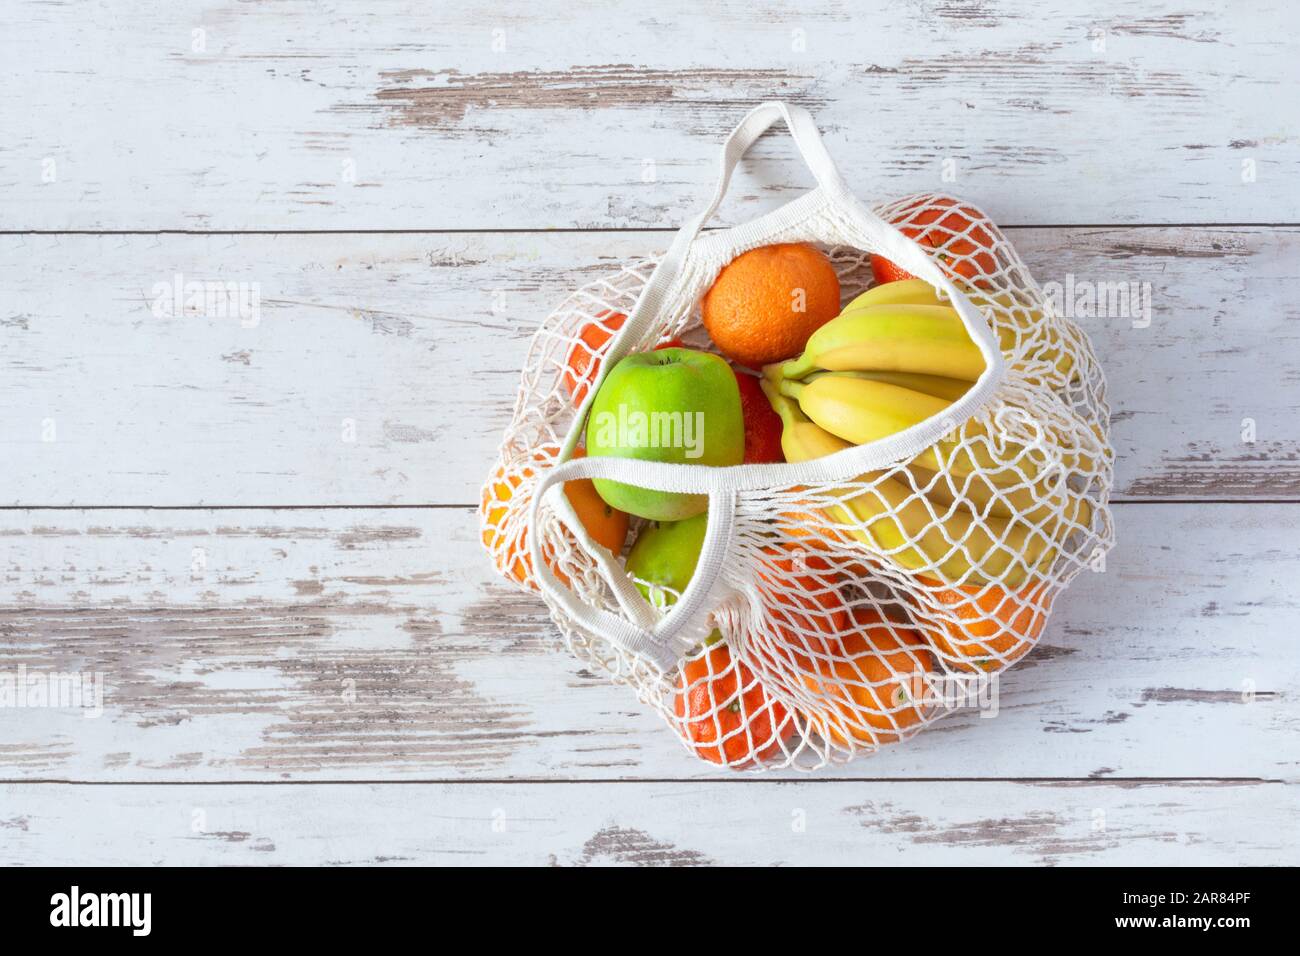 Cotton mesh bag for grocery with fruits and vegetables. Zero waste, no plastic shopping. Sustainable lifestyle concept. Recycling. Stock Photo